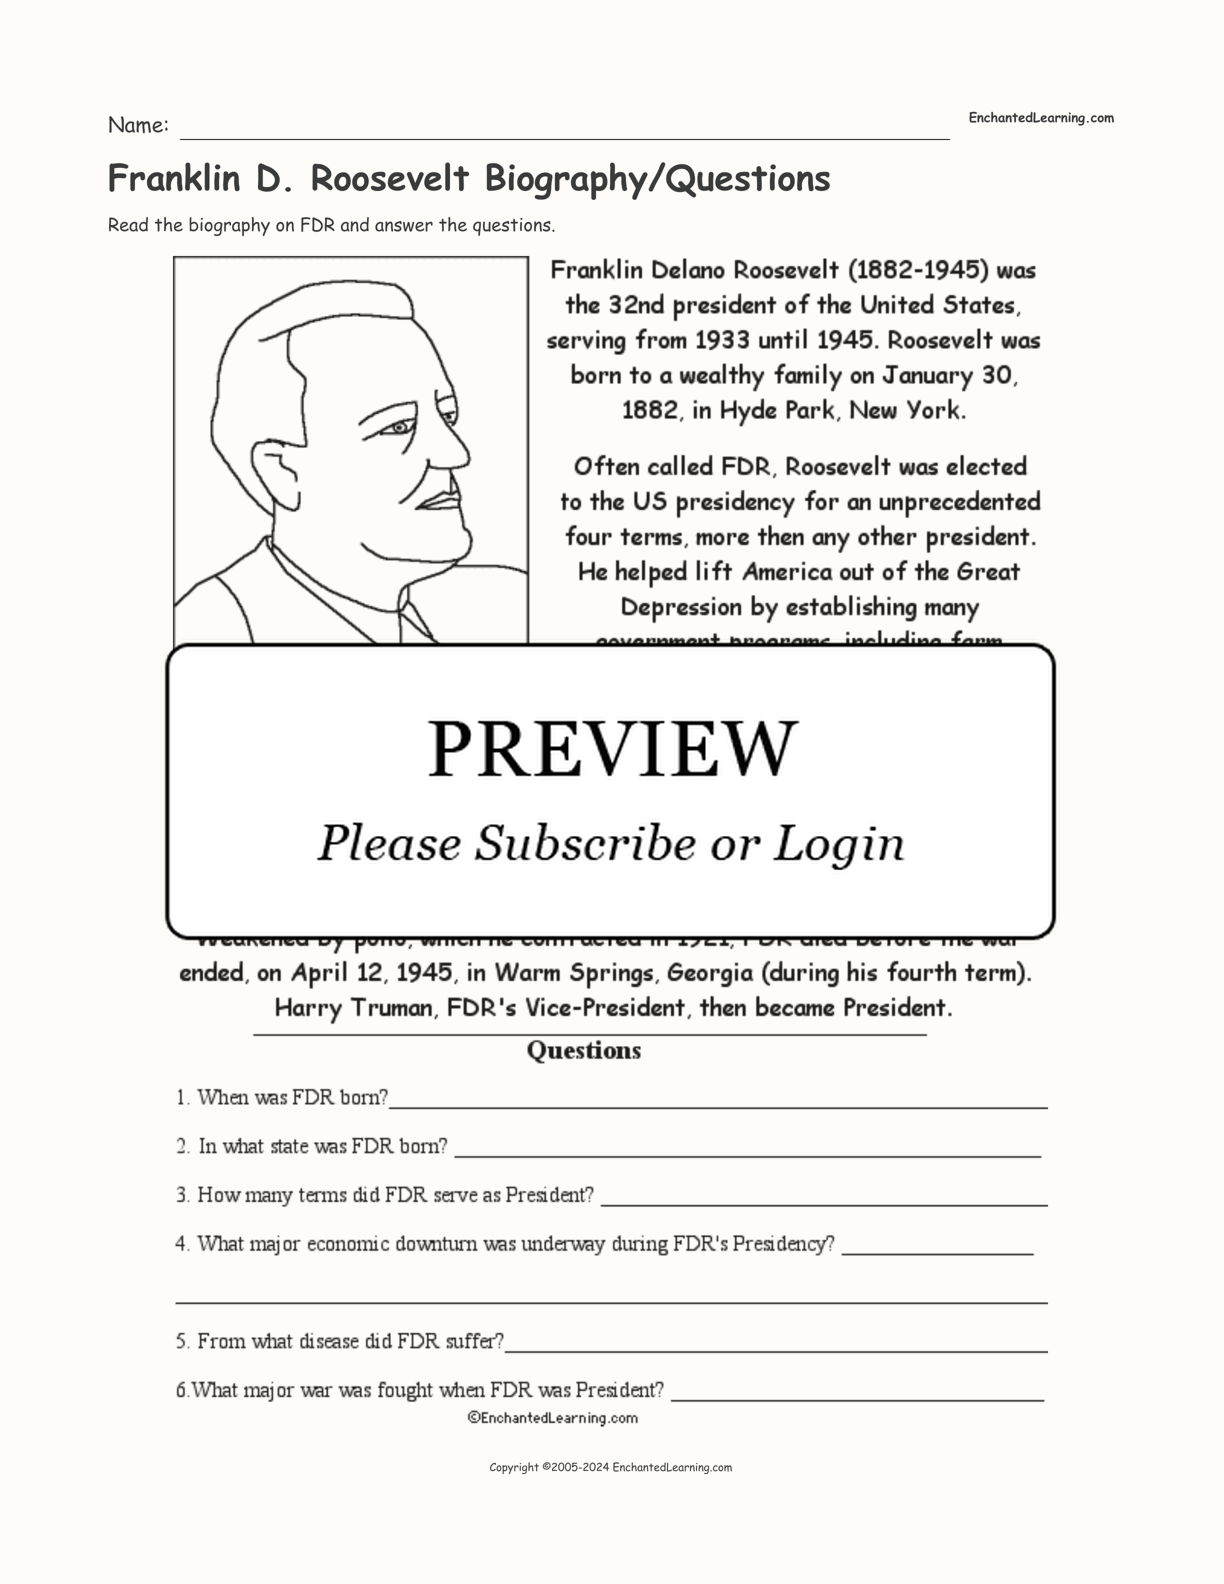 Franklin D. Roosevelt Biography/Questions interactive worksheet page 1